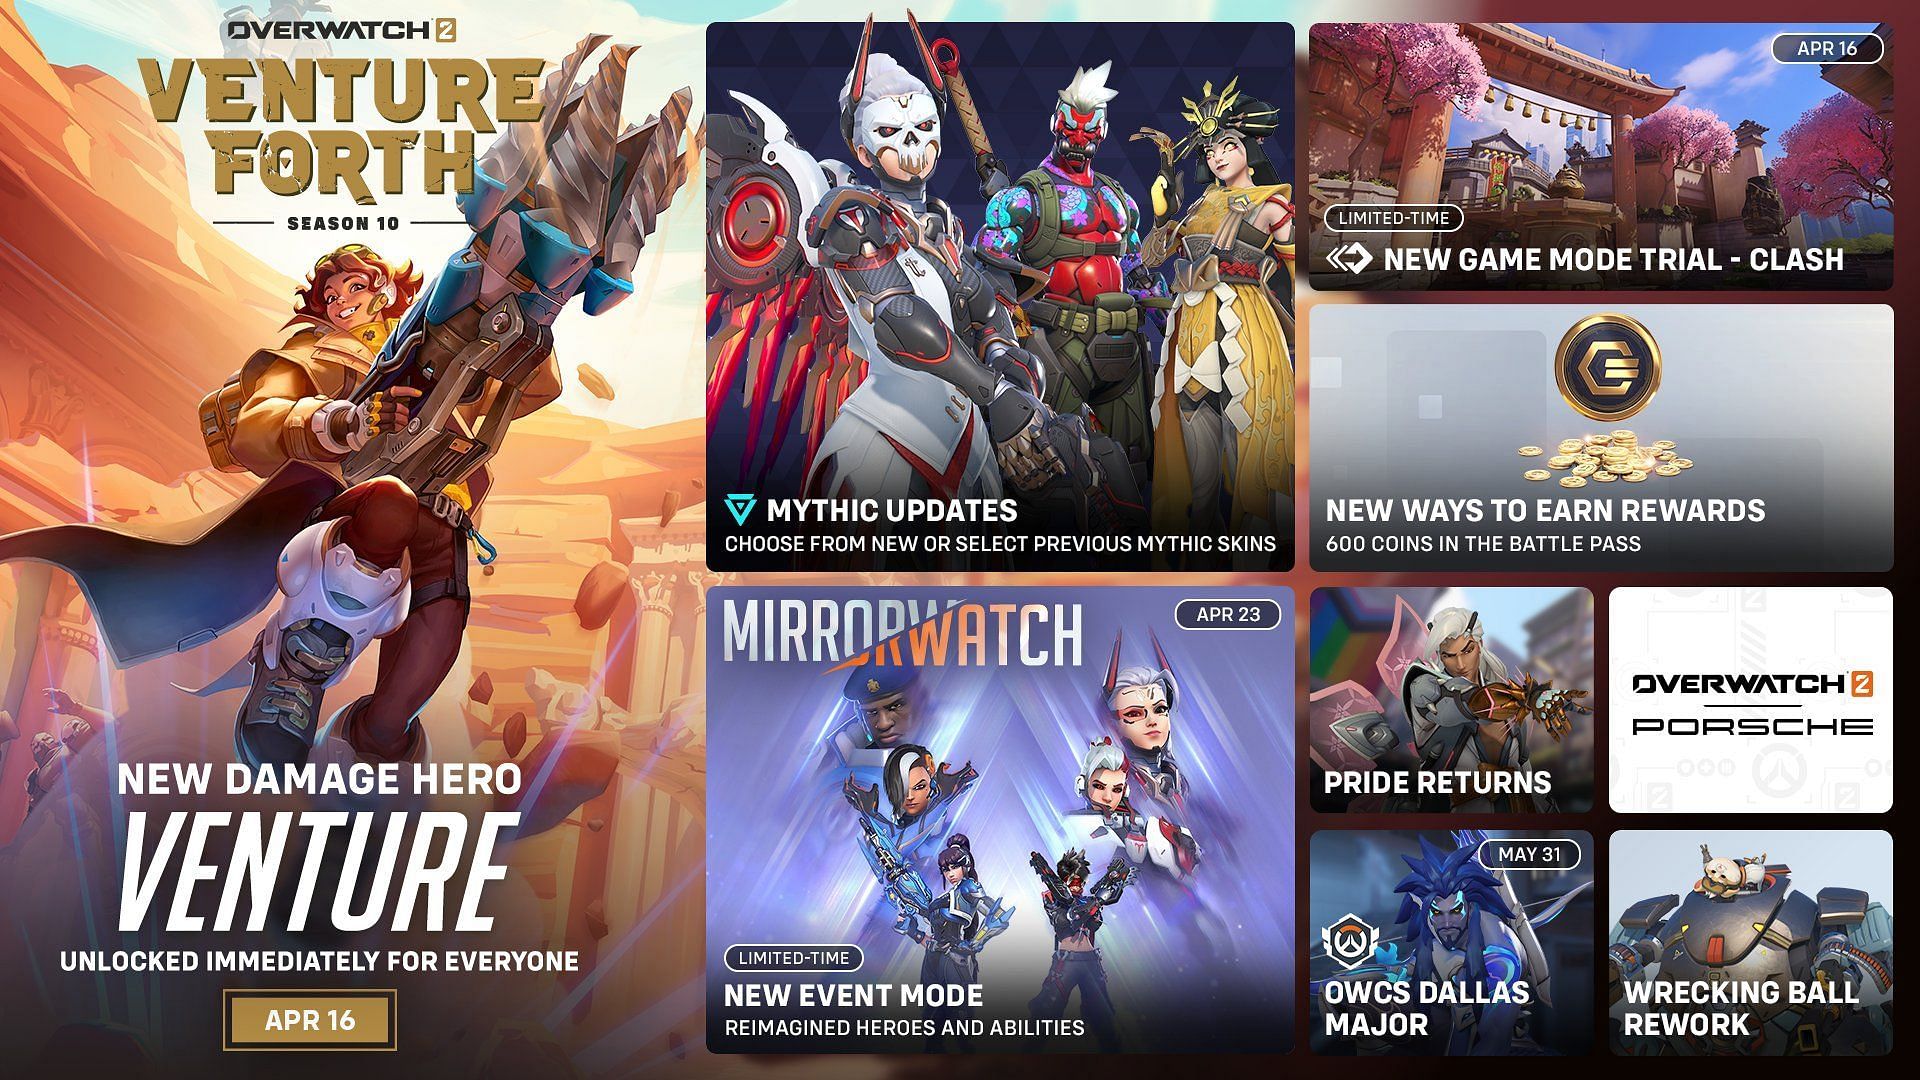 All content in Overwatch 2 Season 10 (Image via Blizzard Entertainment)